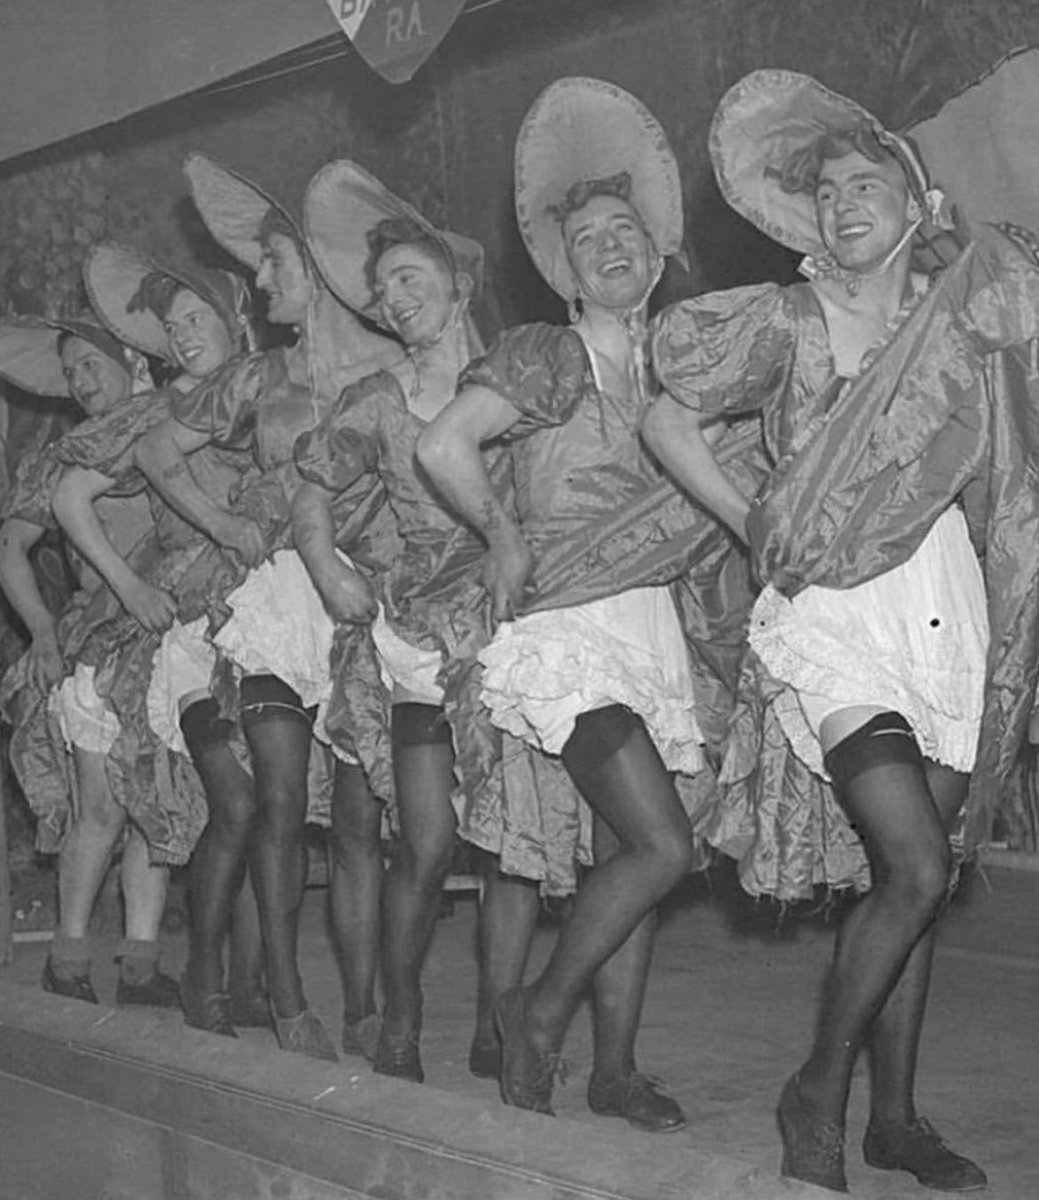 During World War II, drag shows gained popularity among troops from the United States and Britain as a means of stress relief. It provided them with a way to temporarily escape the hardships of war. However, a unique incident occurred when a British unit hosting a drag show came…